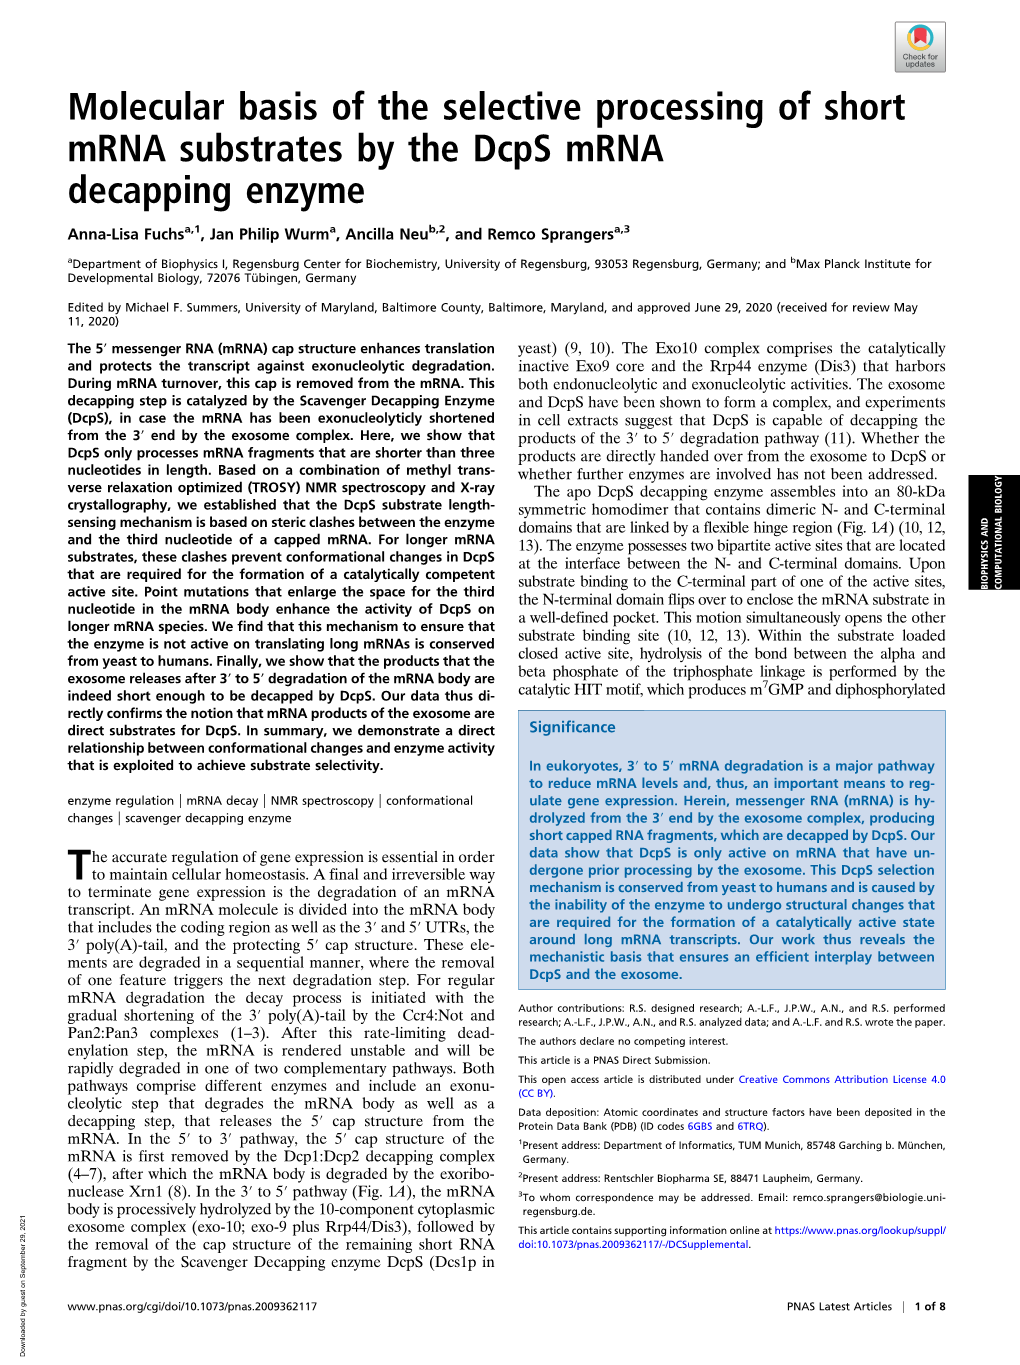 Molecular Basis of the Selective Processing of Short Mrna Substrates by the Dcps Mrna Decapping Enzyme